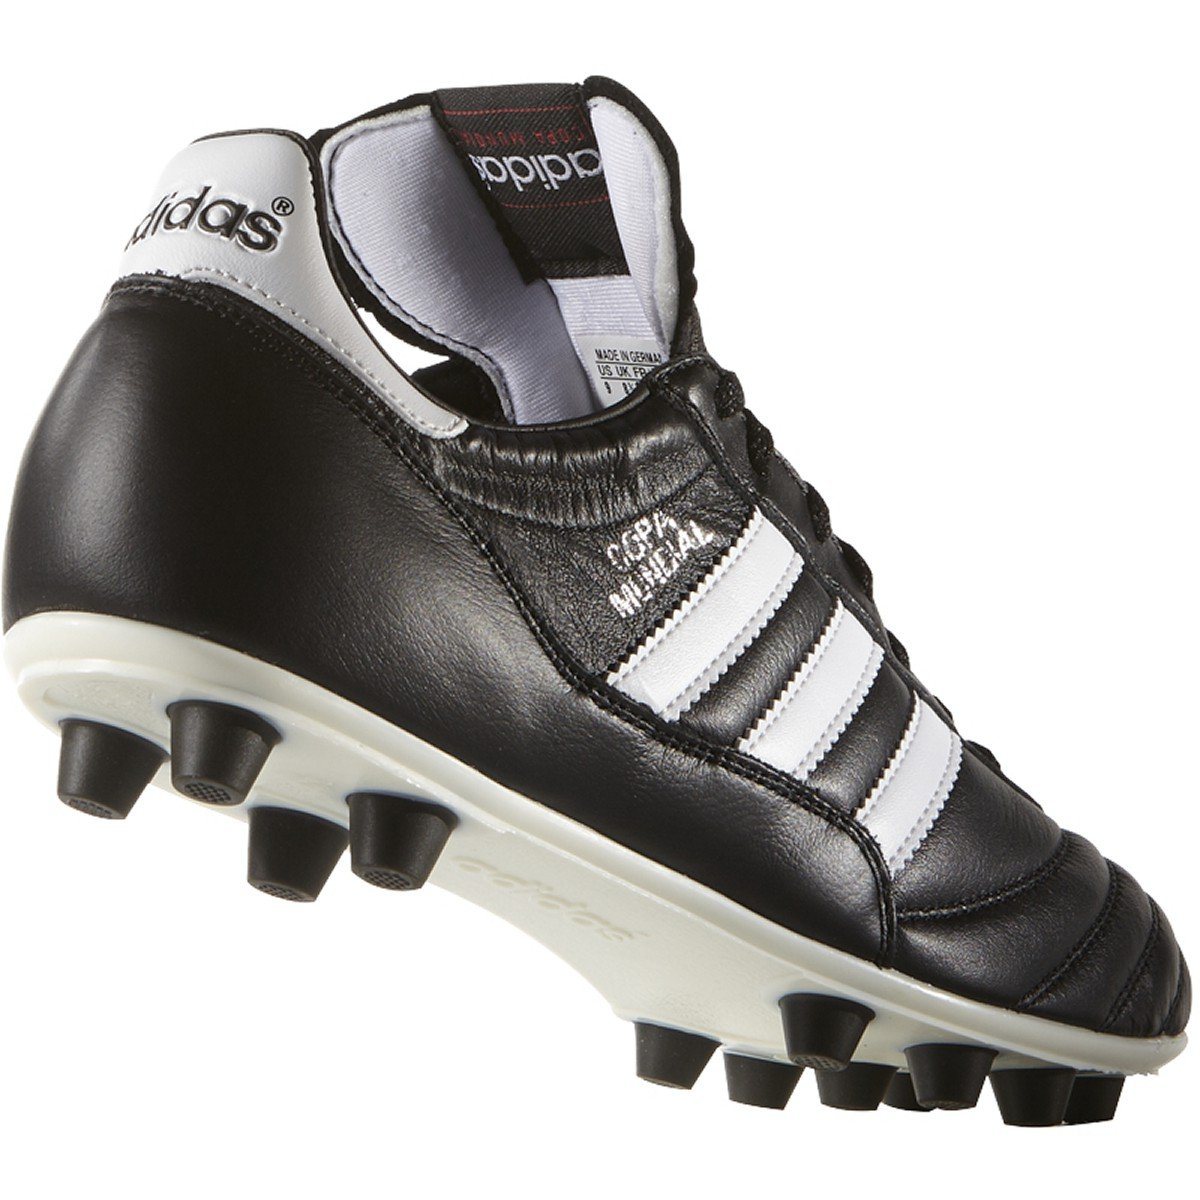 Adidas Copa Leather FG Soccer Cleats |